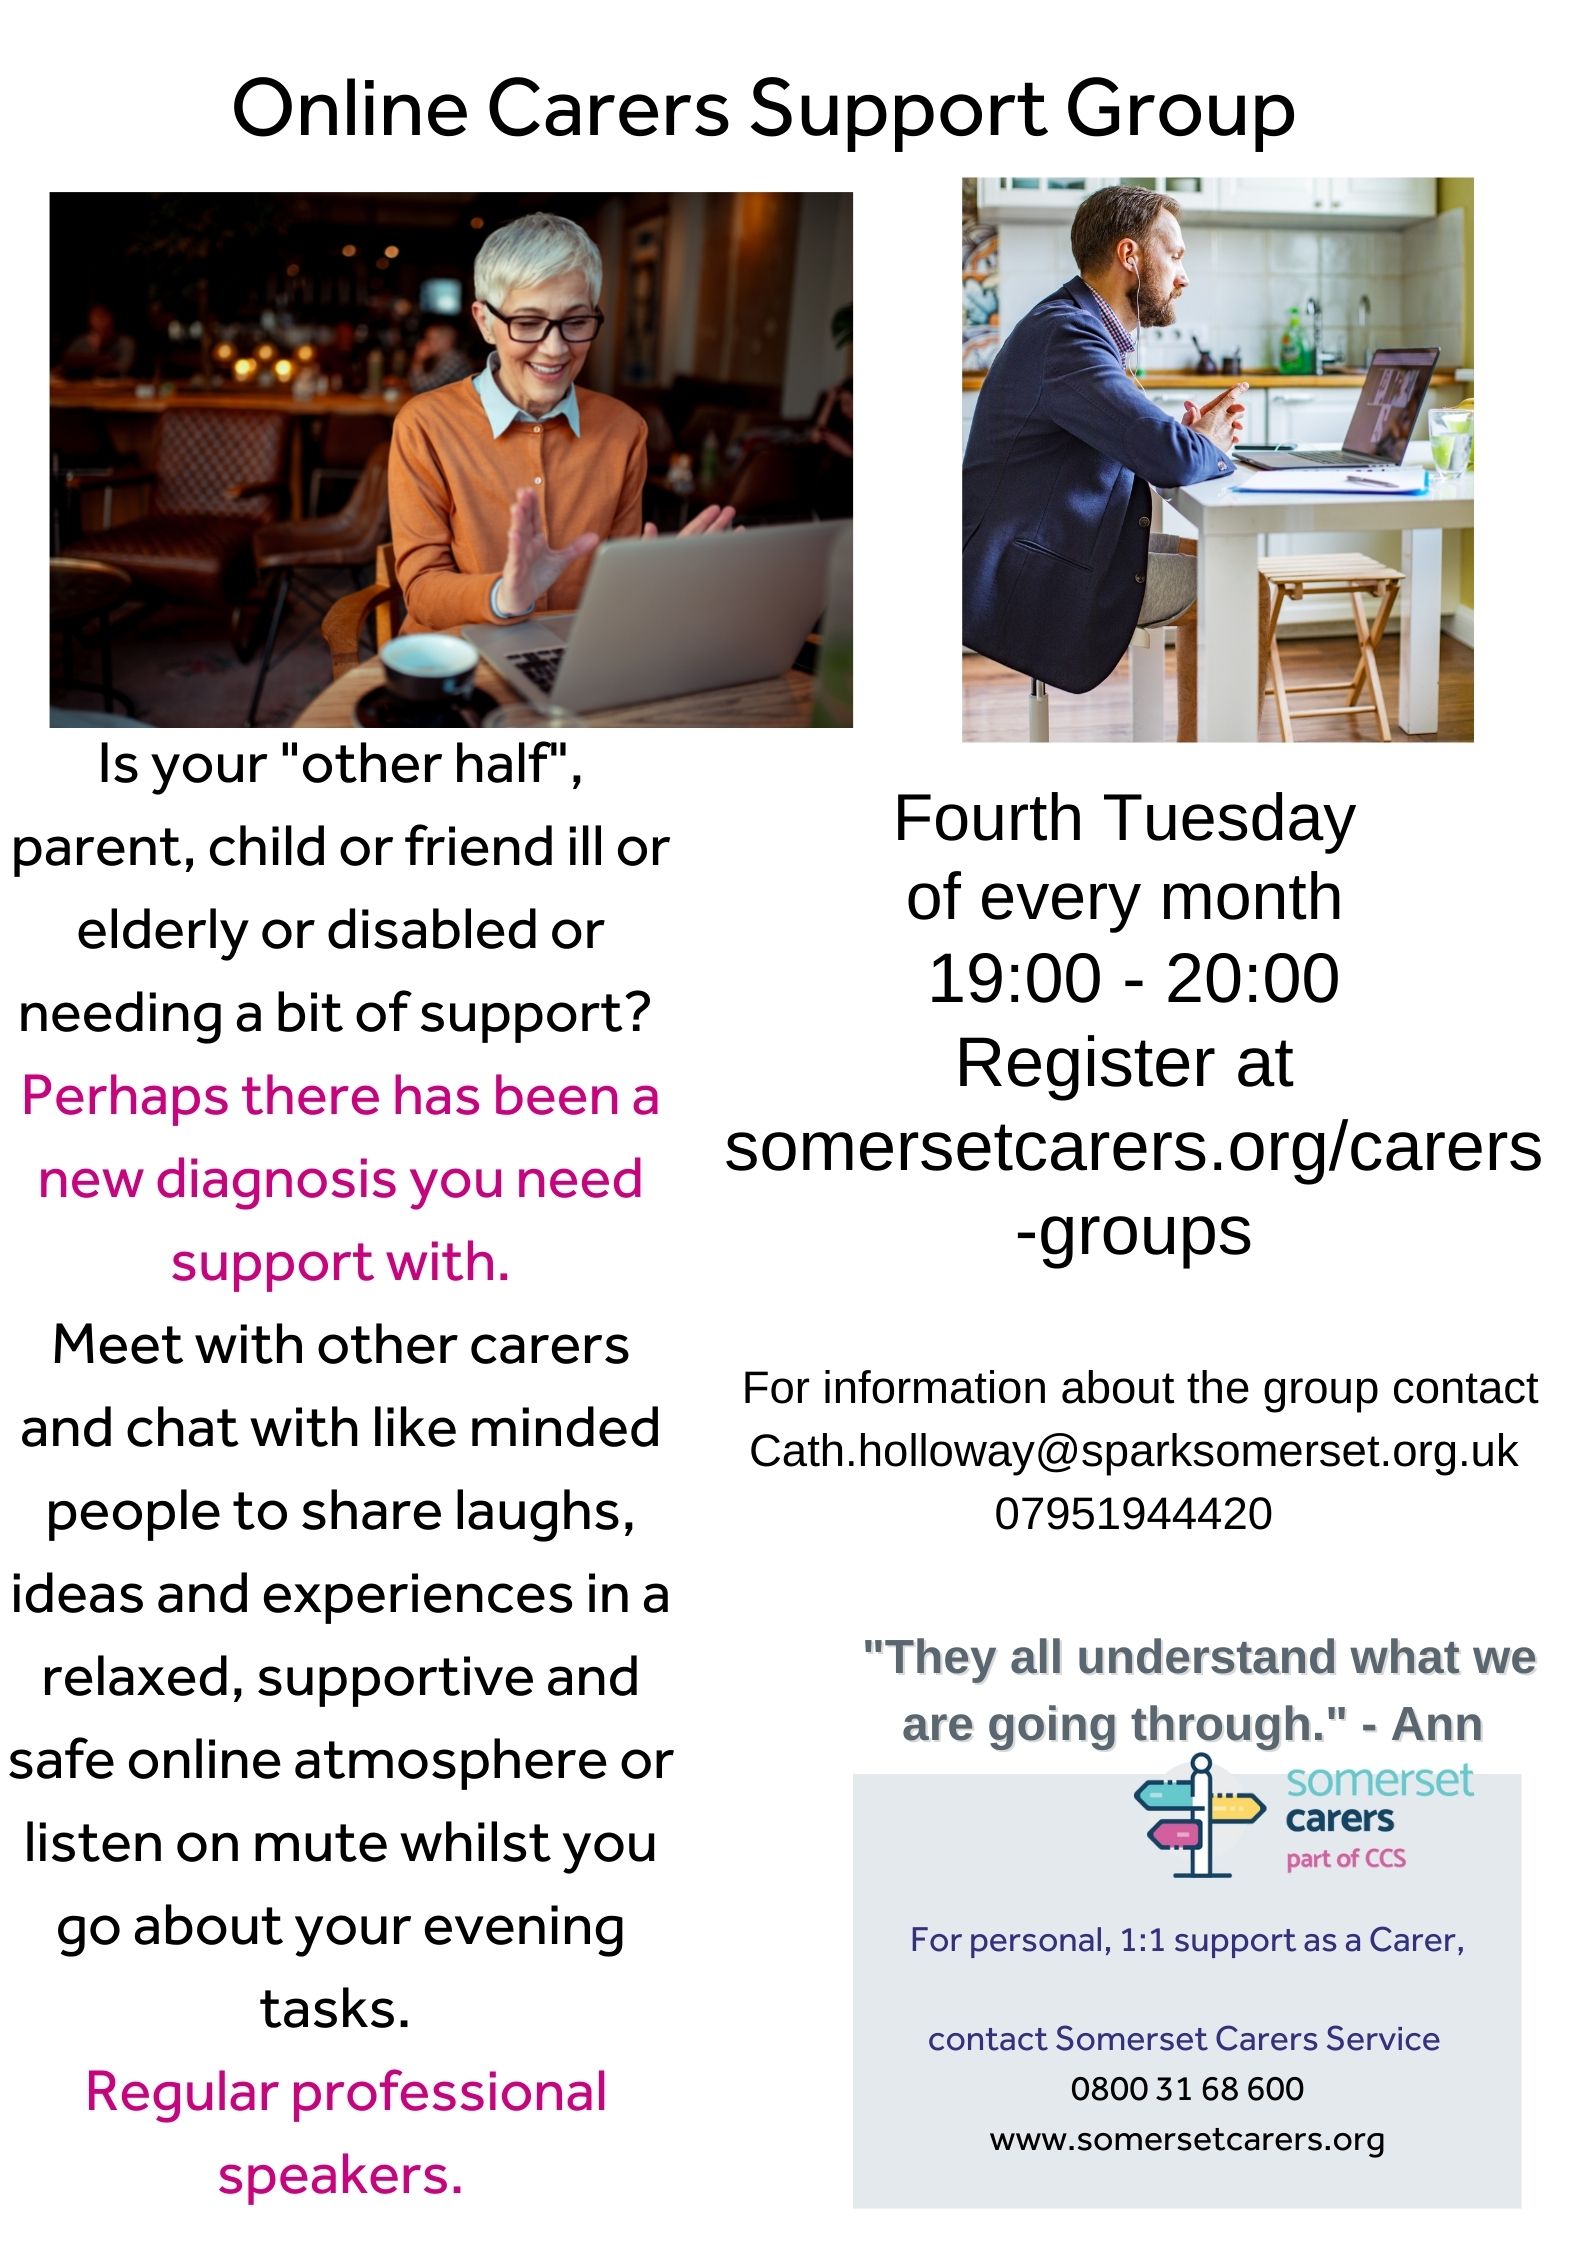 Online Carers Support Group Details (also available at link above)